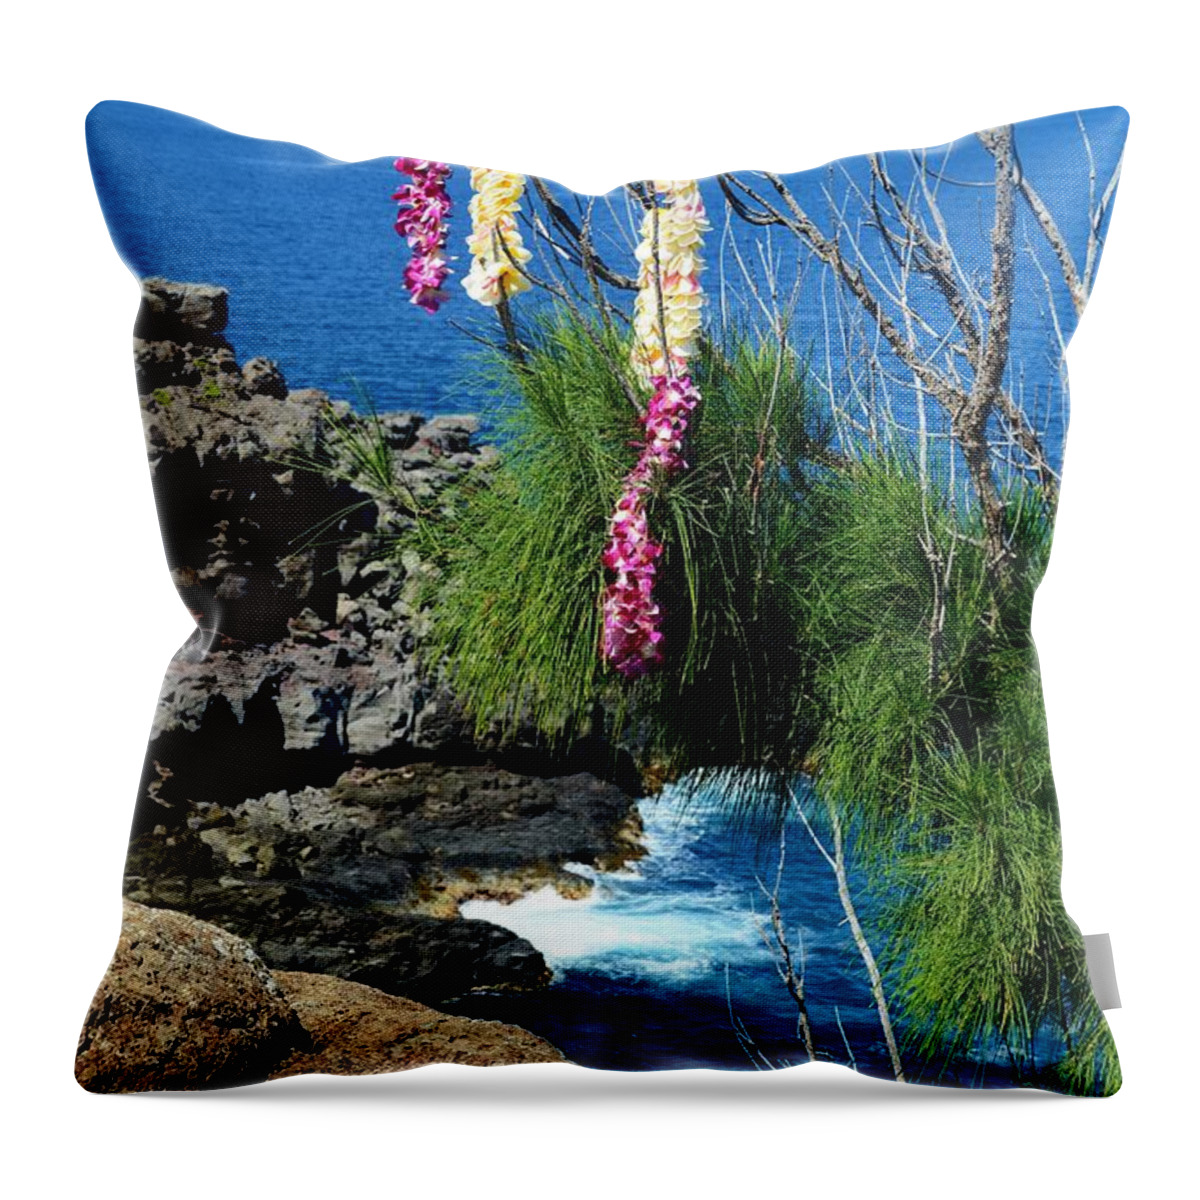 Love Returned To Earth Throw Pillow featuring the photograph Love Returned To Earth by Patrick Witz